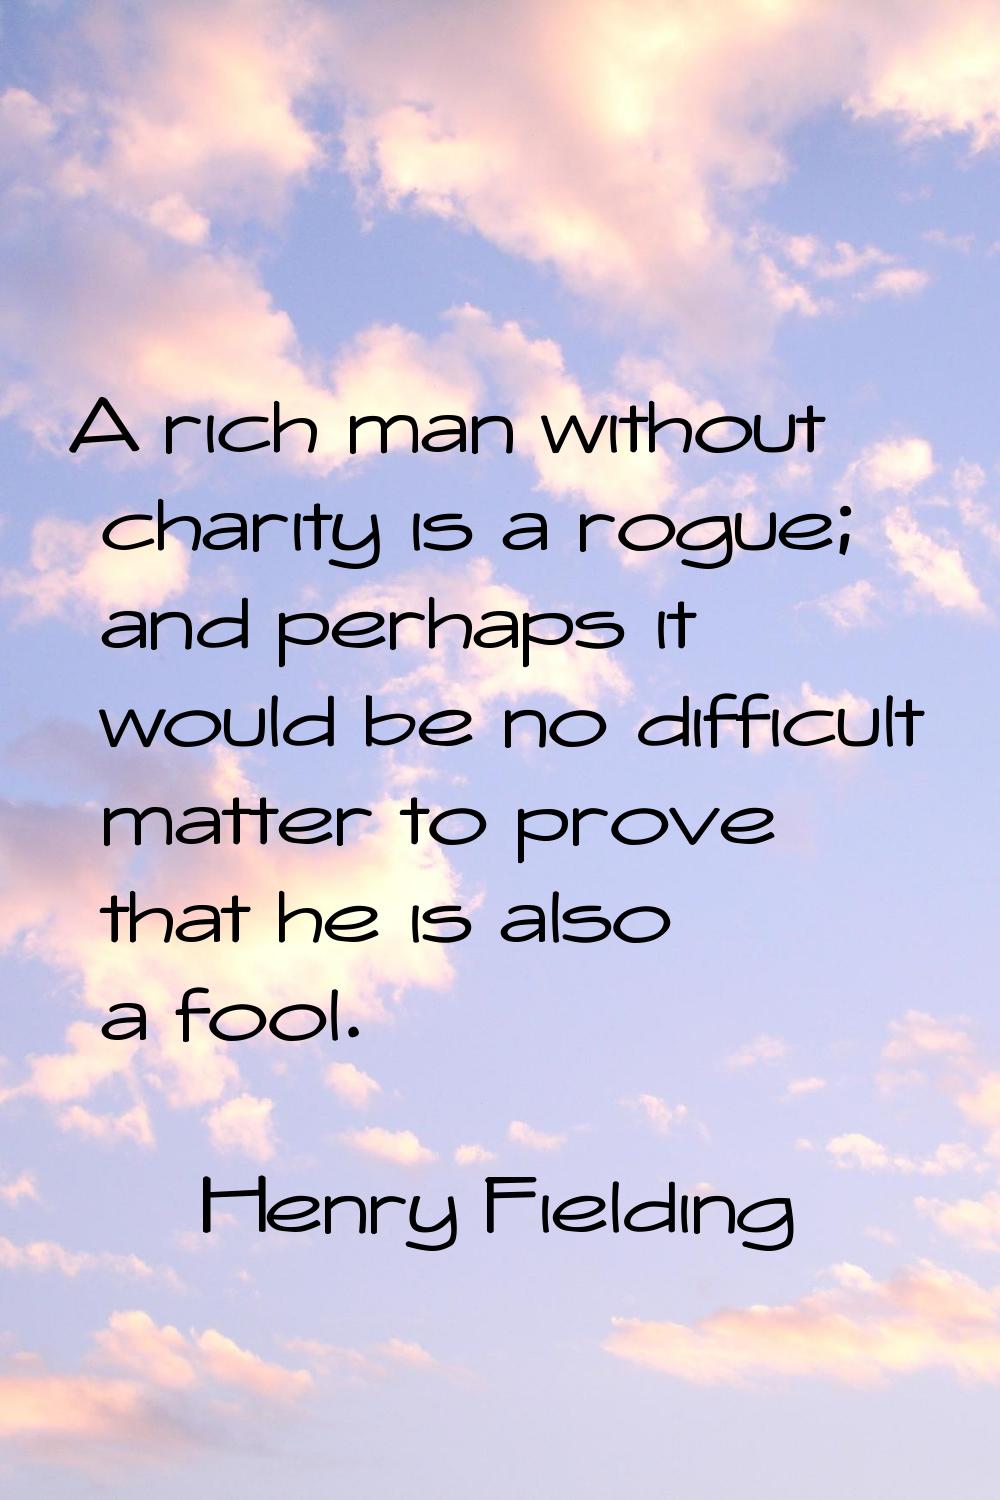 A rich man without charity is a rogue; and perhaps it would be no difficult matter to prove that he